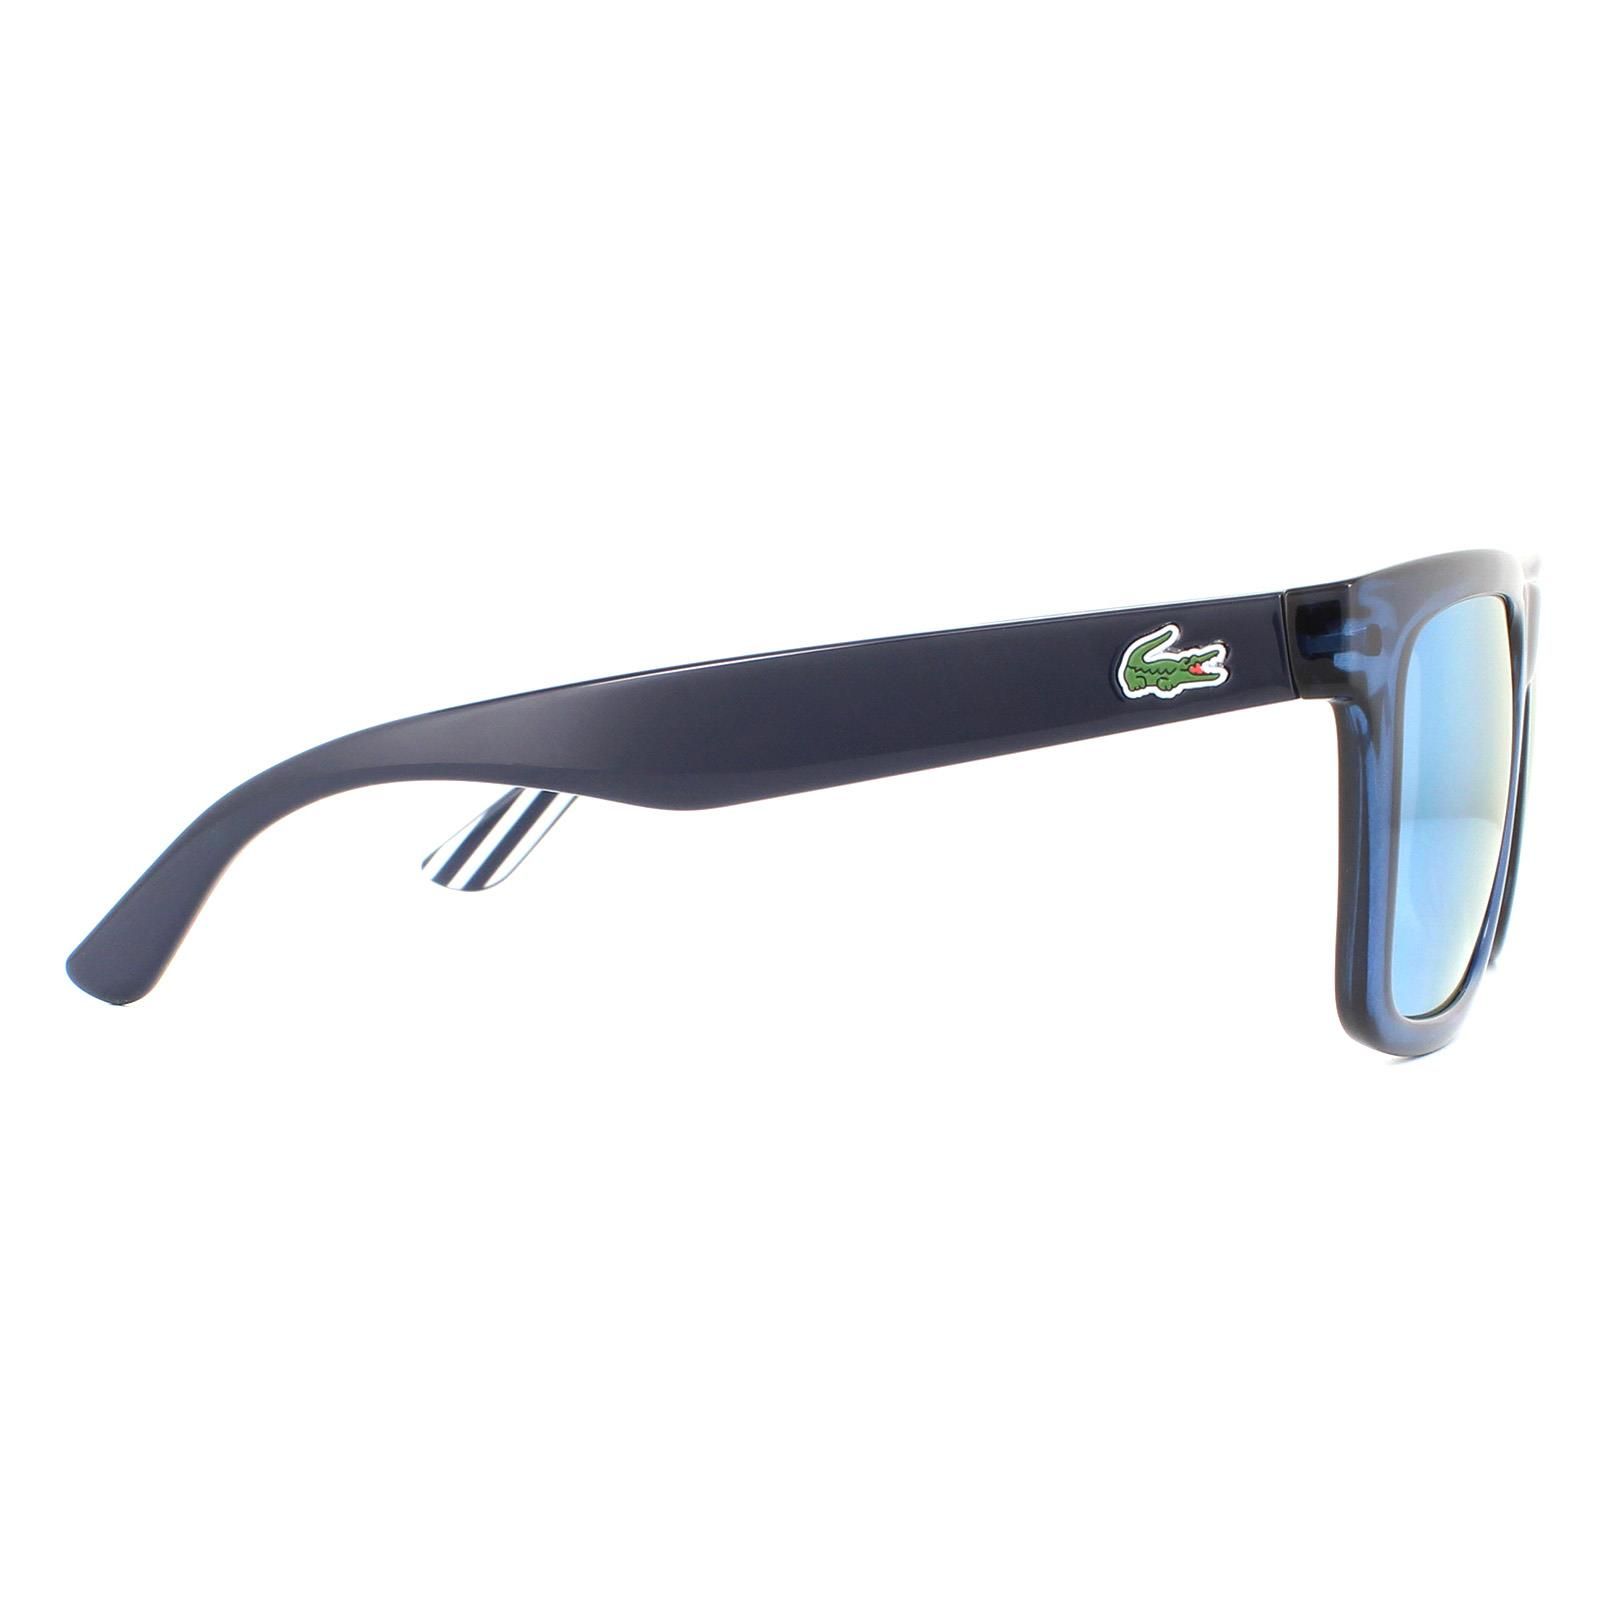 Lacoste Sunglasses L750S 424 Blue Blue Mirror are a simple style with a classic rectangular look with the instantly recognisable alligator logo on the temple. AN interesting black and white inside pattern completes the look.